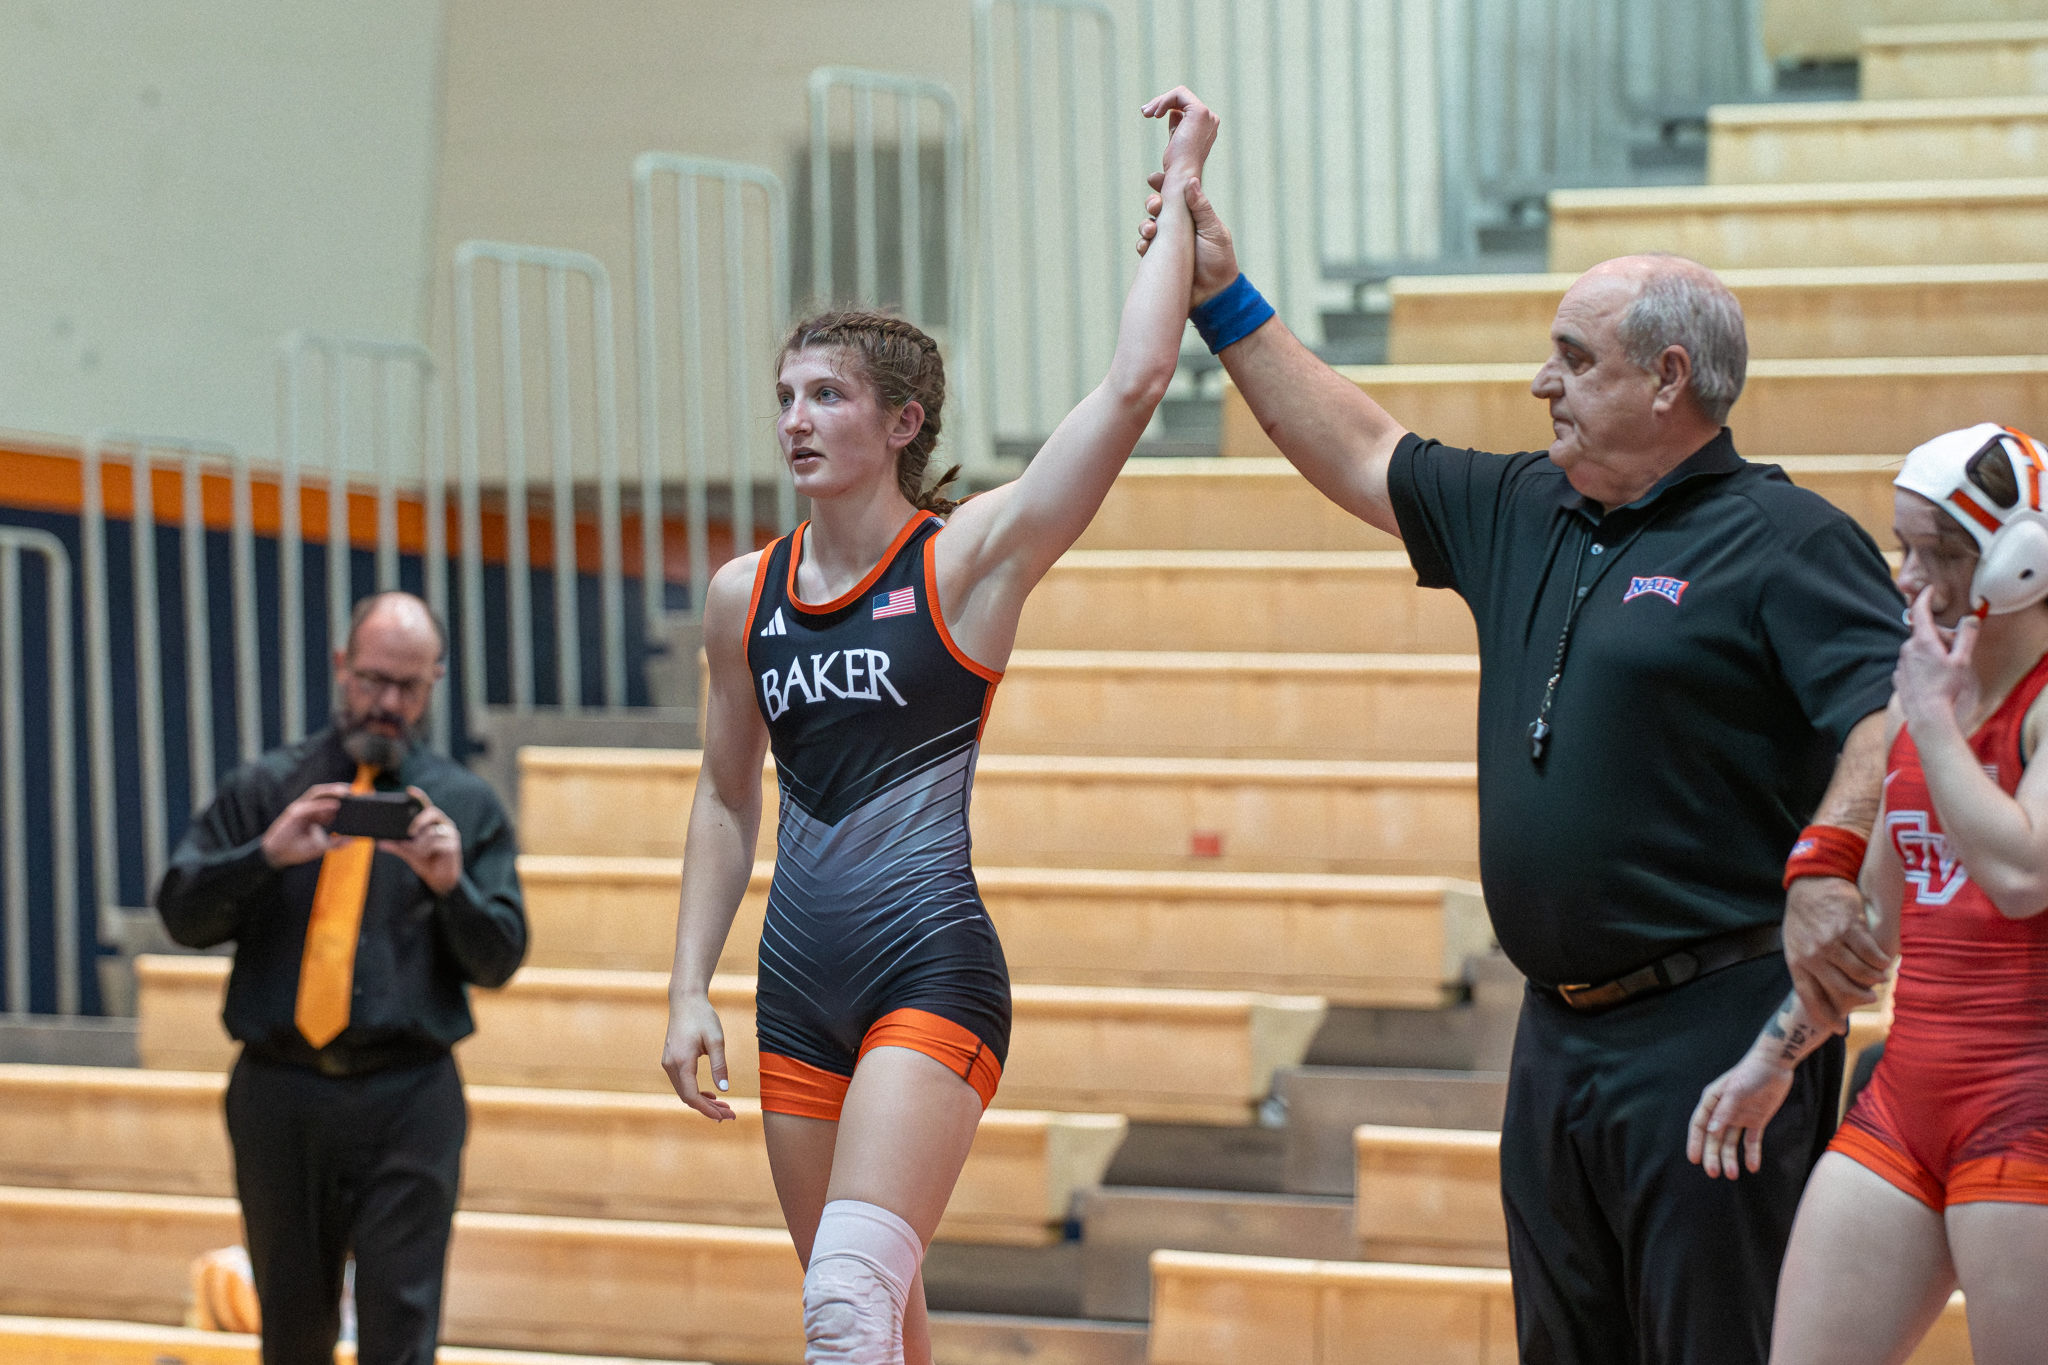 Heath's Win Over No. 2 Nationally Ranked Opponent Highlights Dual vs. Grand View